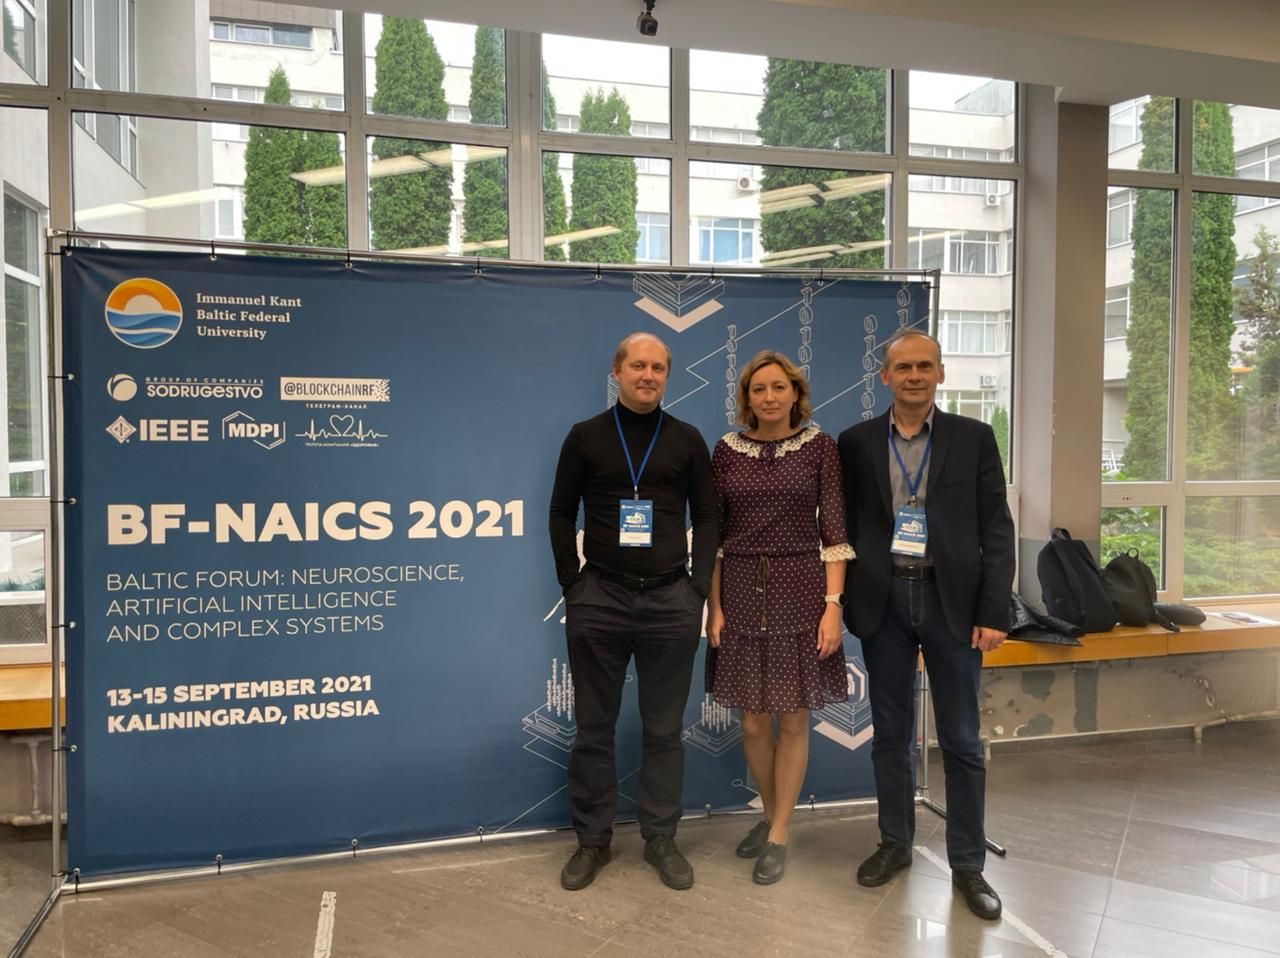 The Center took part in the Baltic Forum BF-NAICS 2021